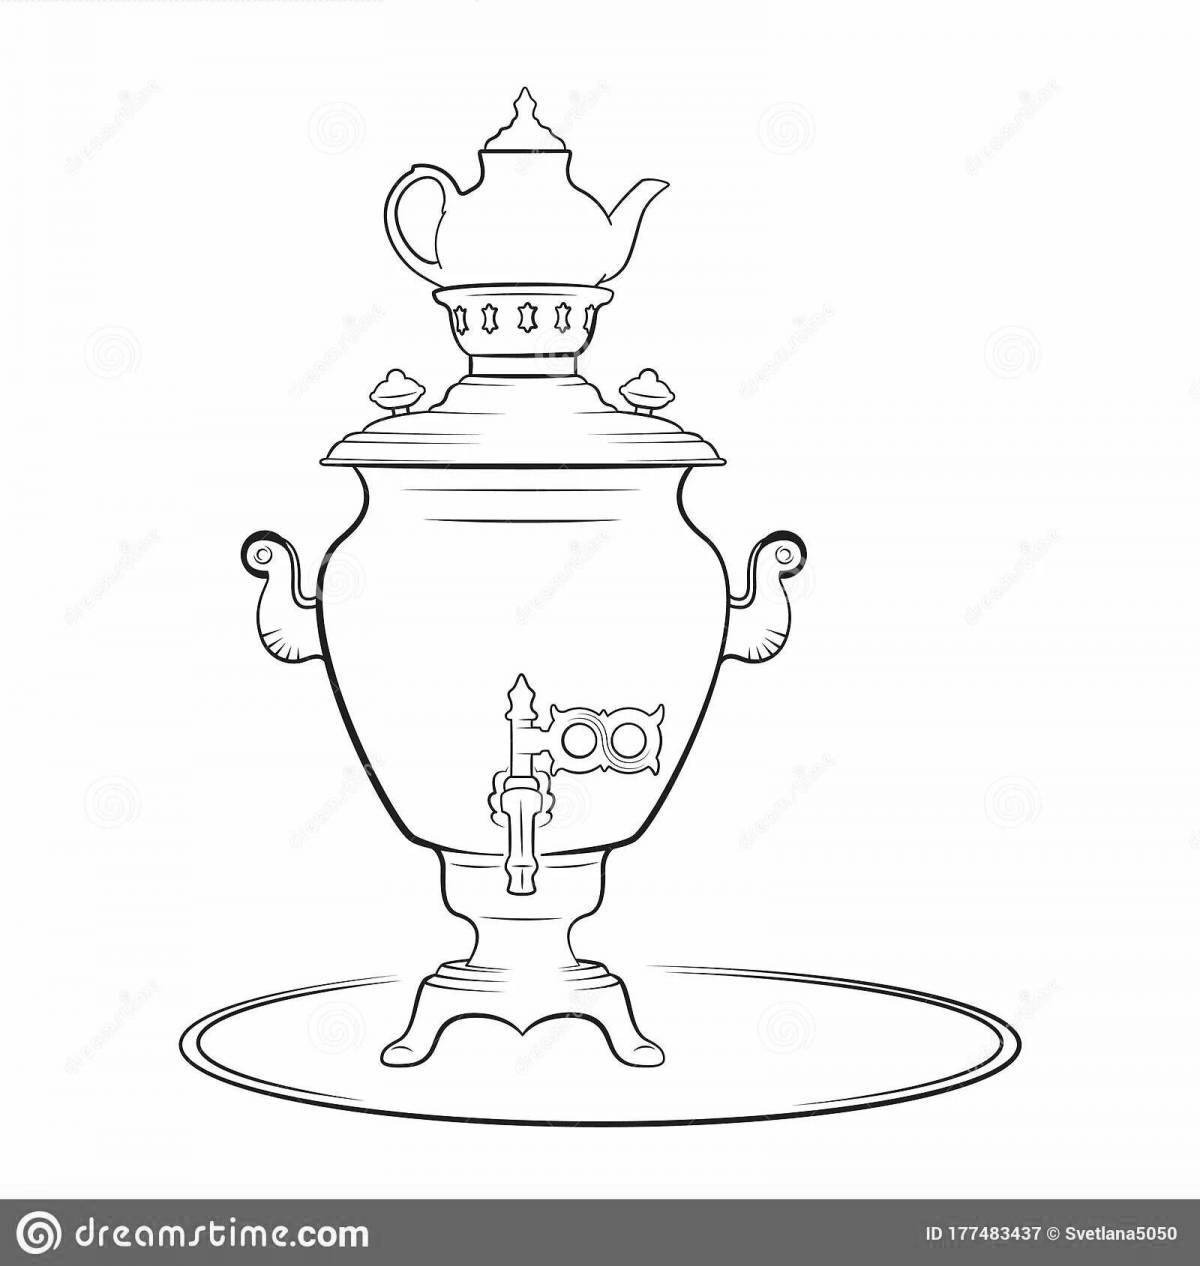 Awesome drawing of a samovar for kids